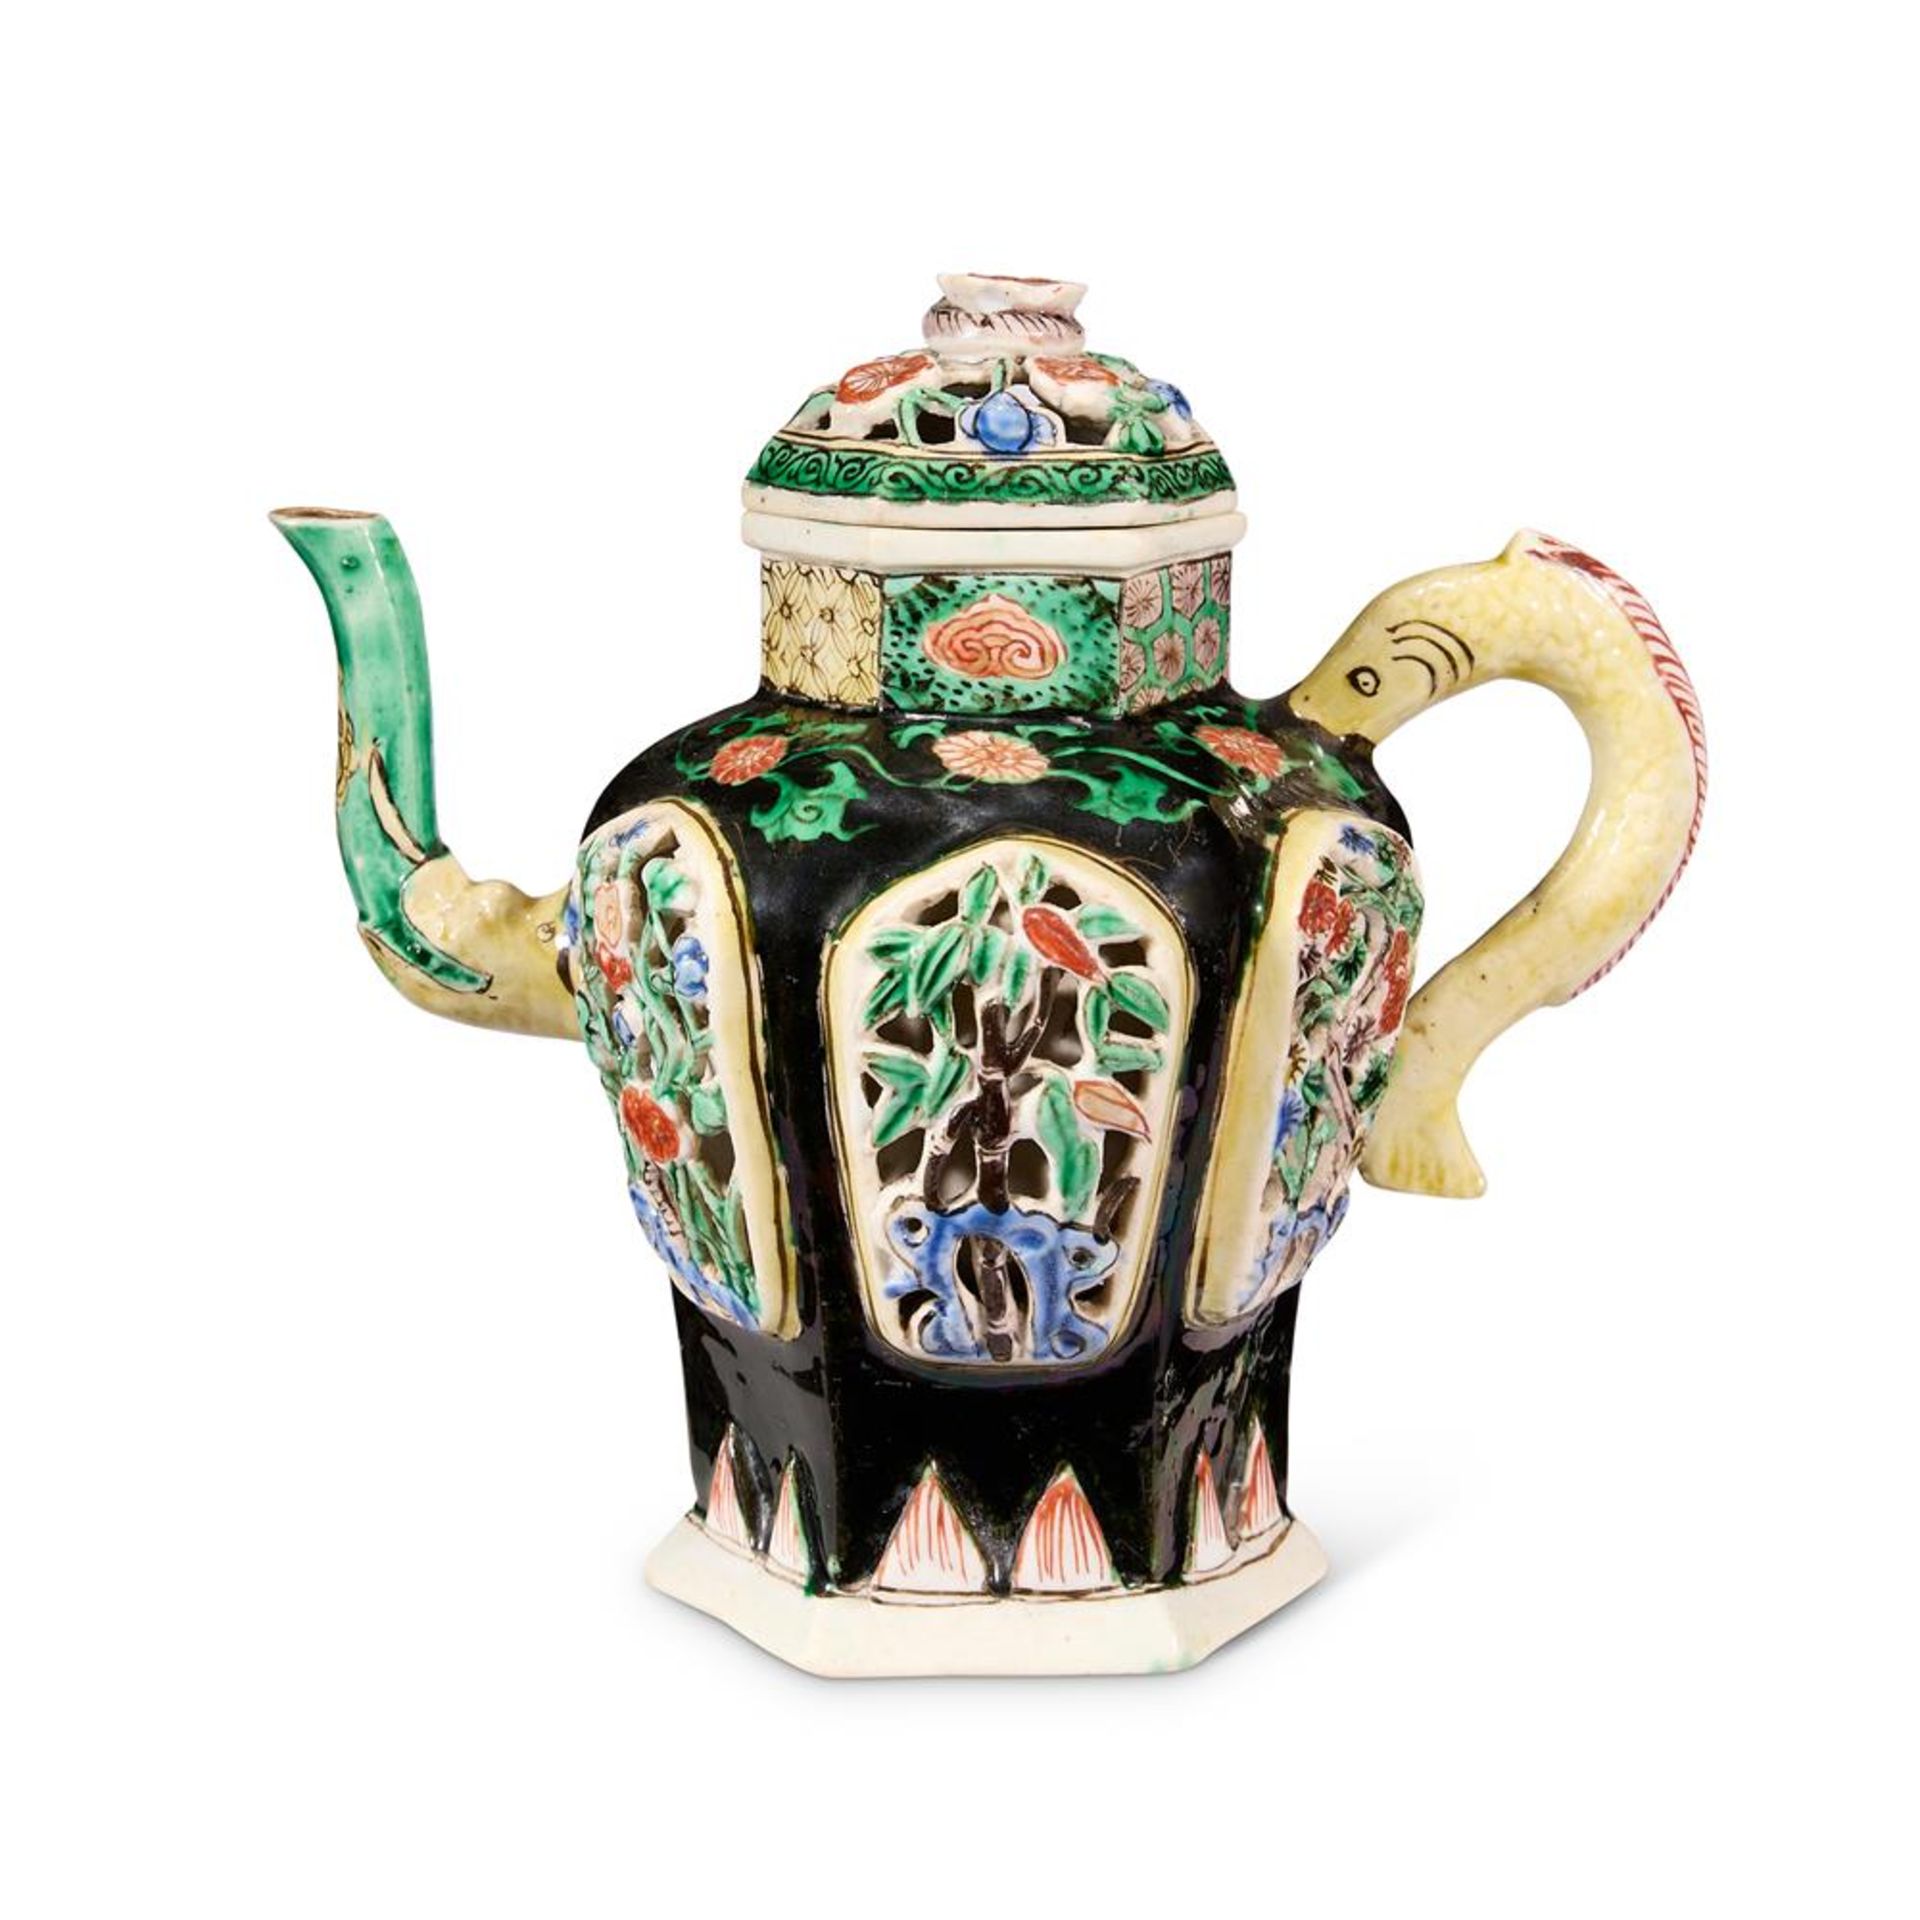 A CHINESE FAMILLE NOIRE HEXAGONAL 'THREE FRIENDS OF WINTER' TEAPOT AND COVER, QING DYNASTY